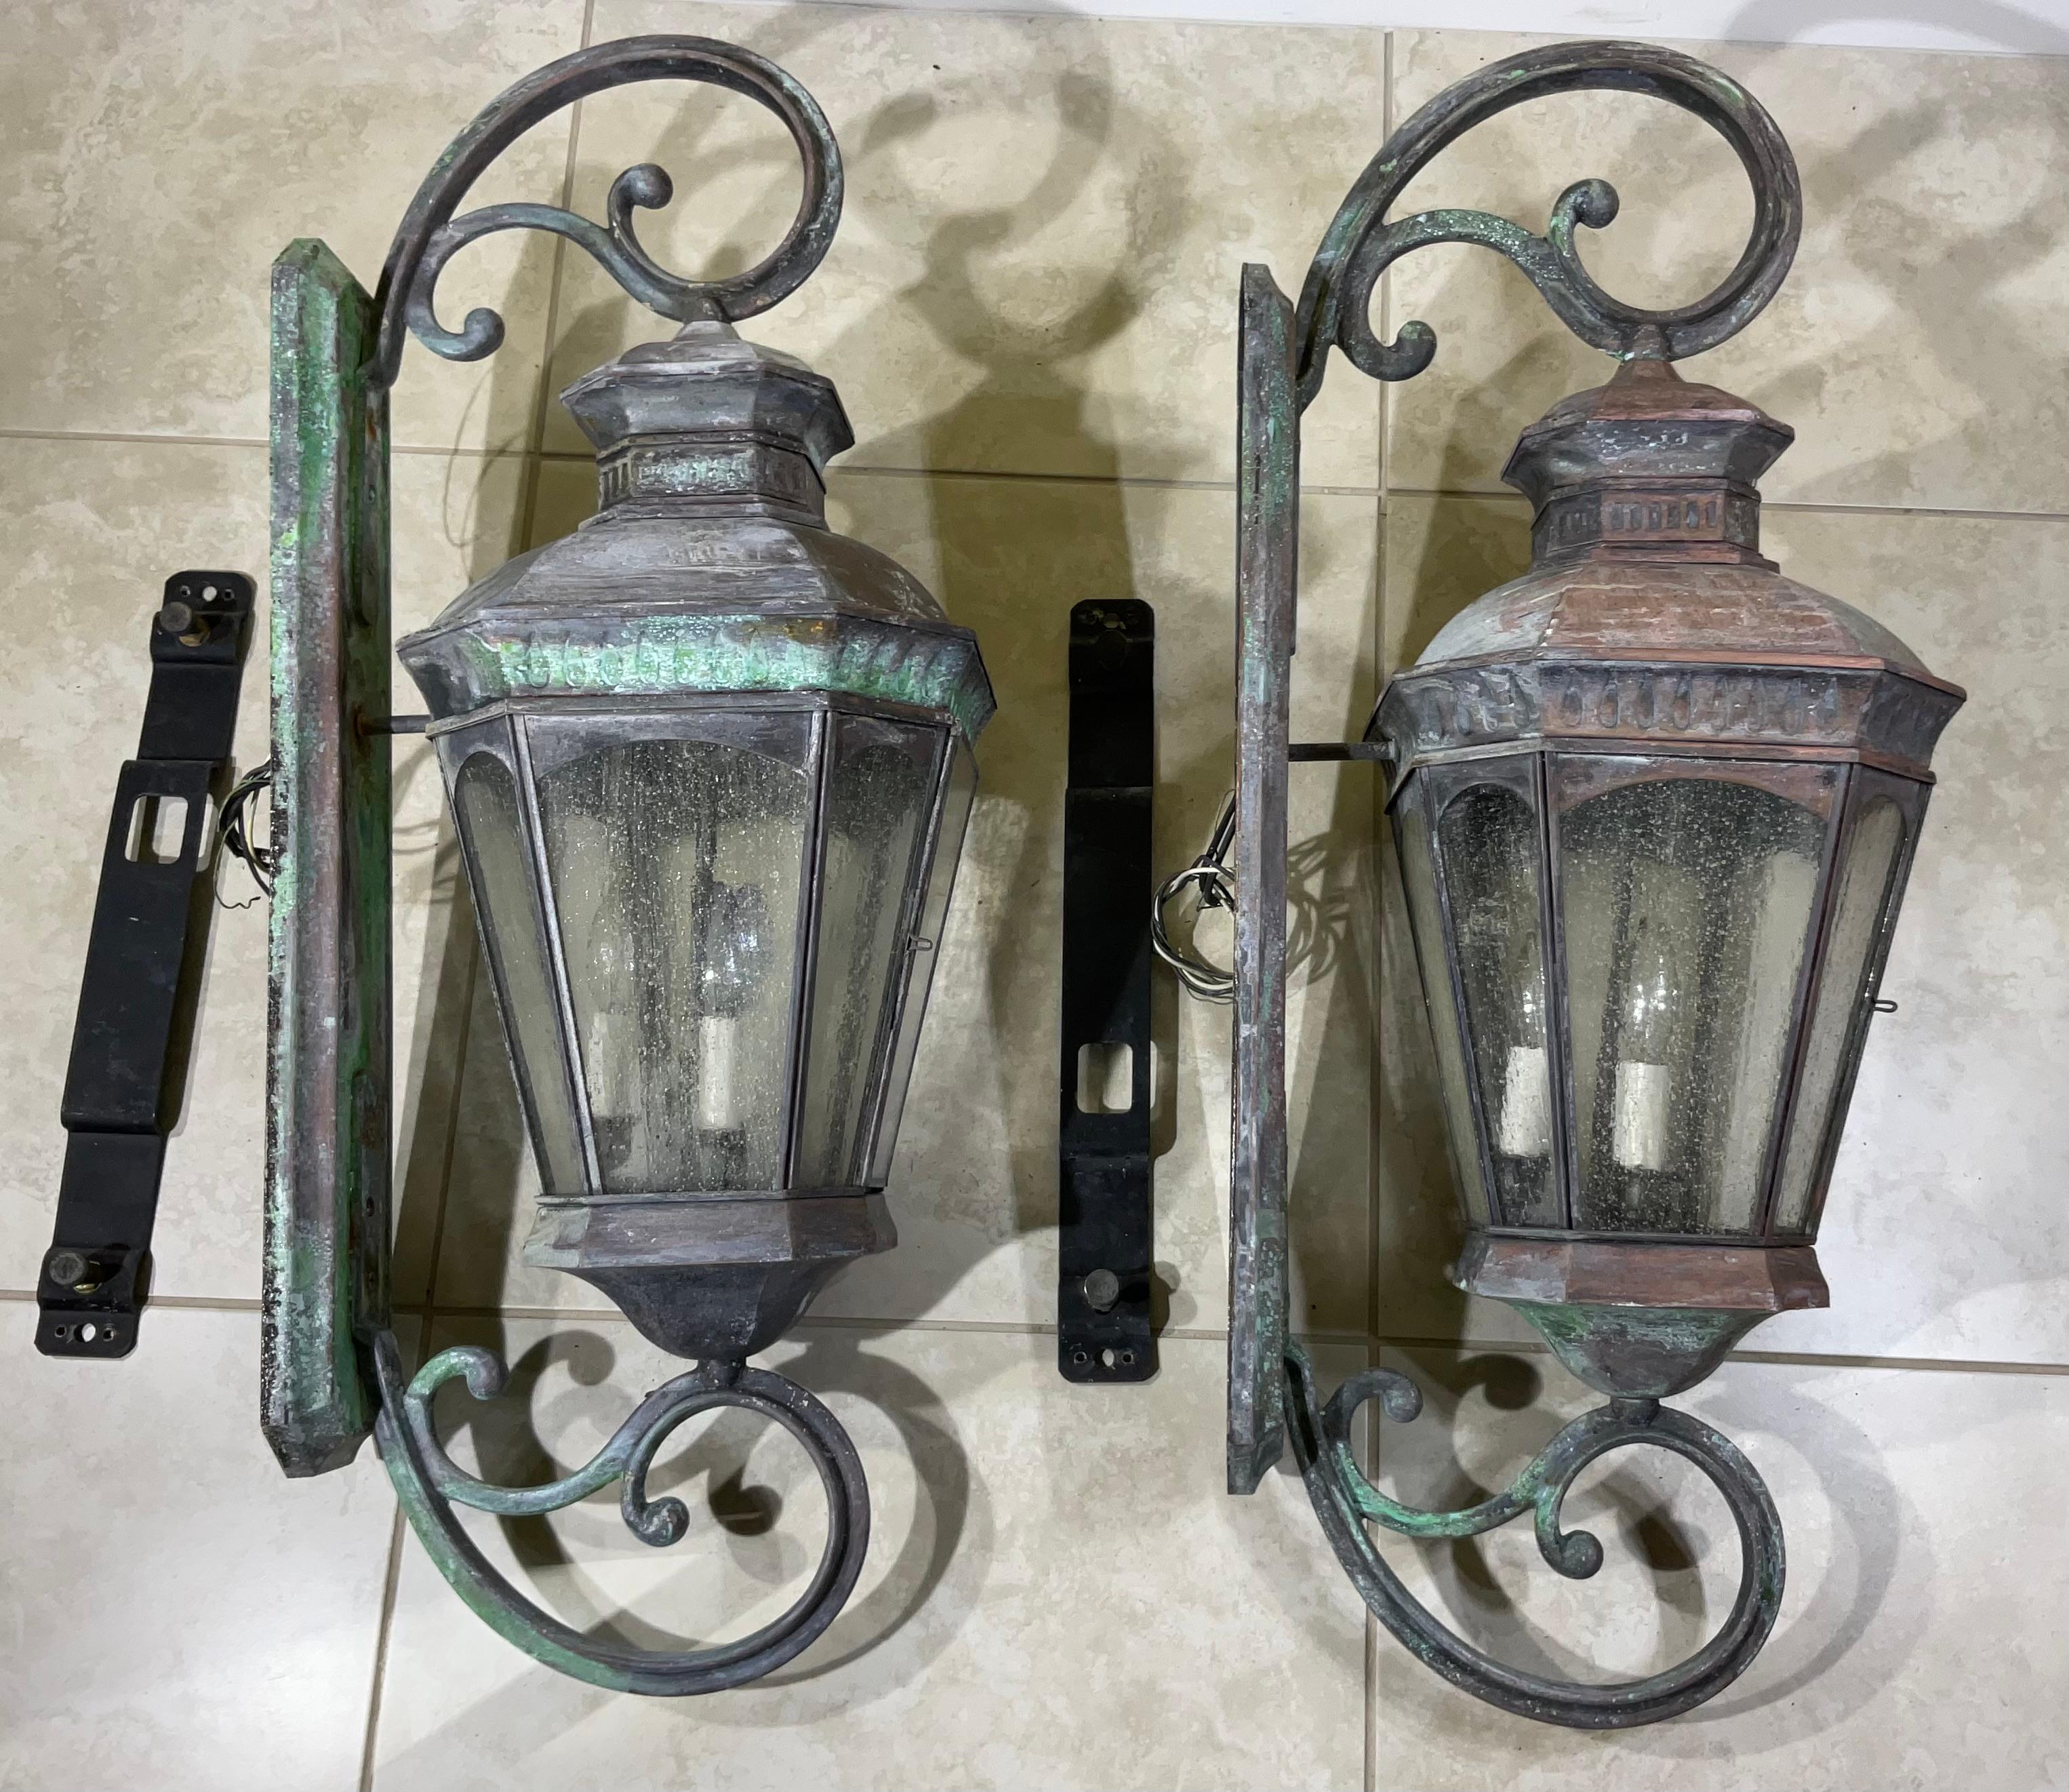 Exceptional large impressive pair of wall lantern made of solid brass, quality workmanship, electrified with three 40/watt light each, beautiful texture glass. Great light exposure.
Suitable for wet location.
Great patina decorative pair of lantern